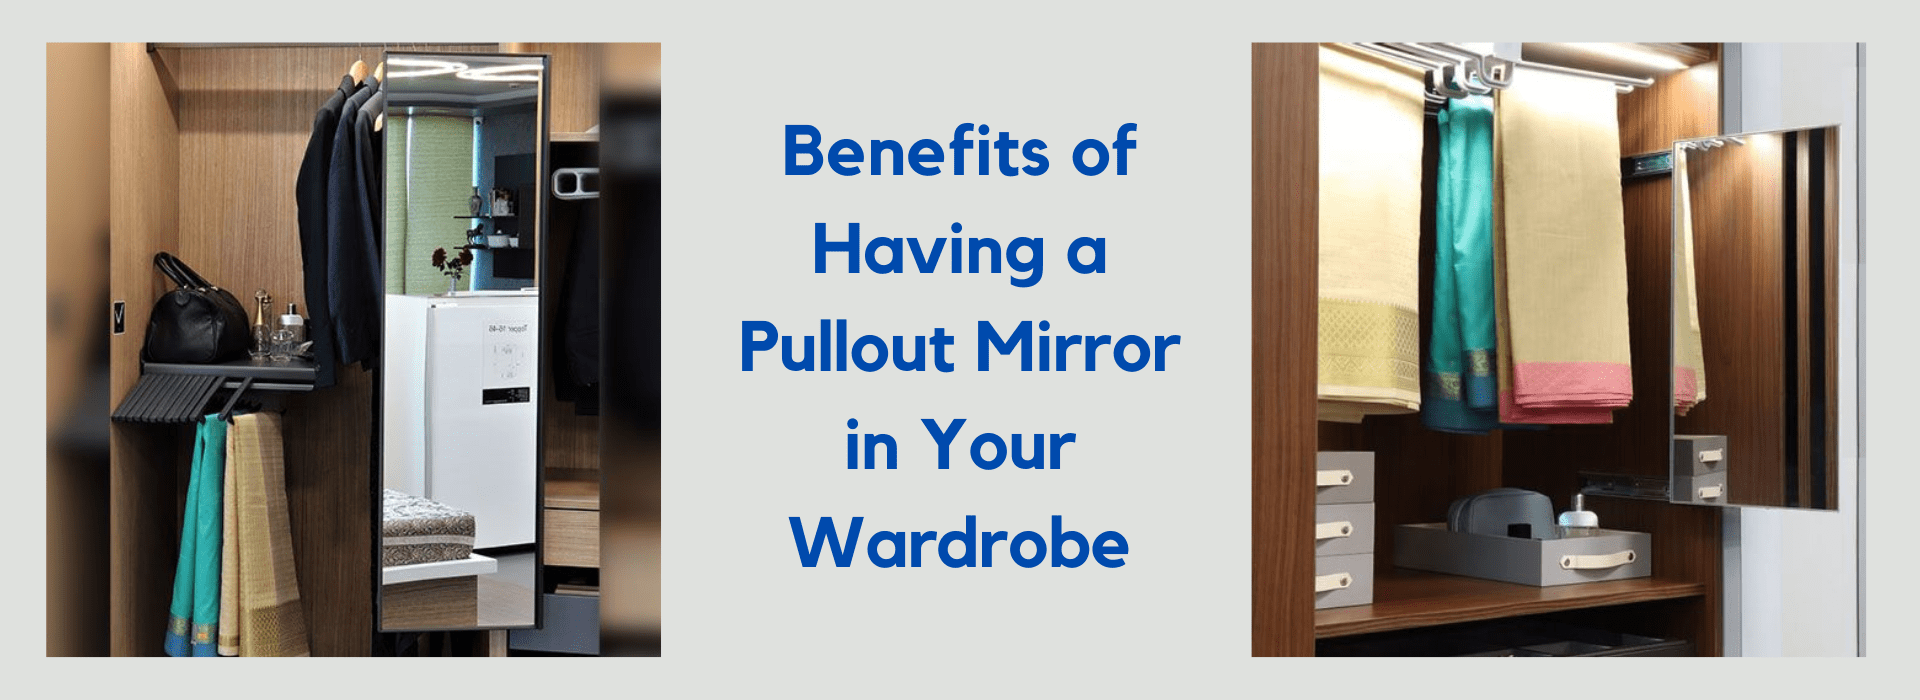 Benefits of Having a Pullout Mirror in Your Wardrobe